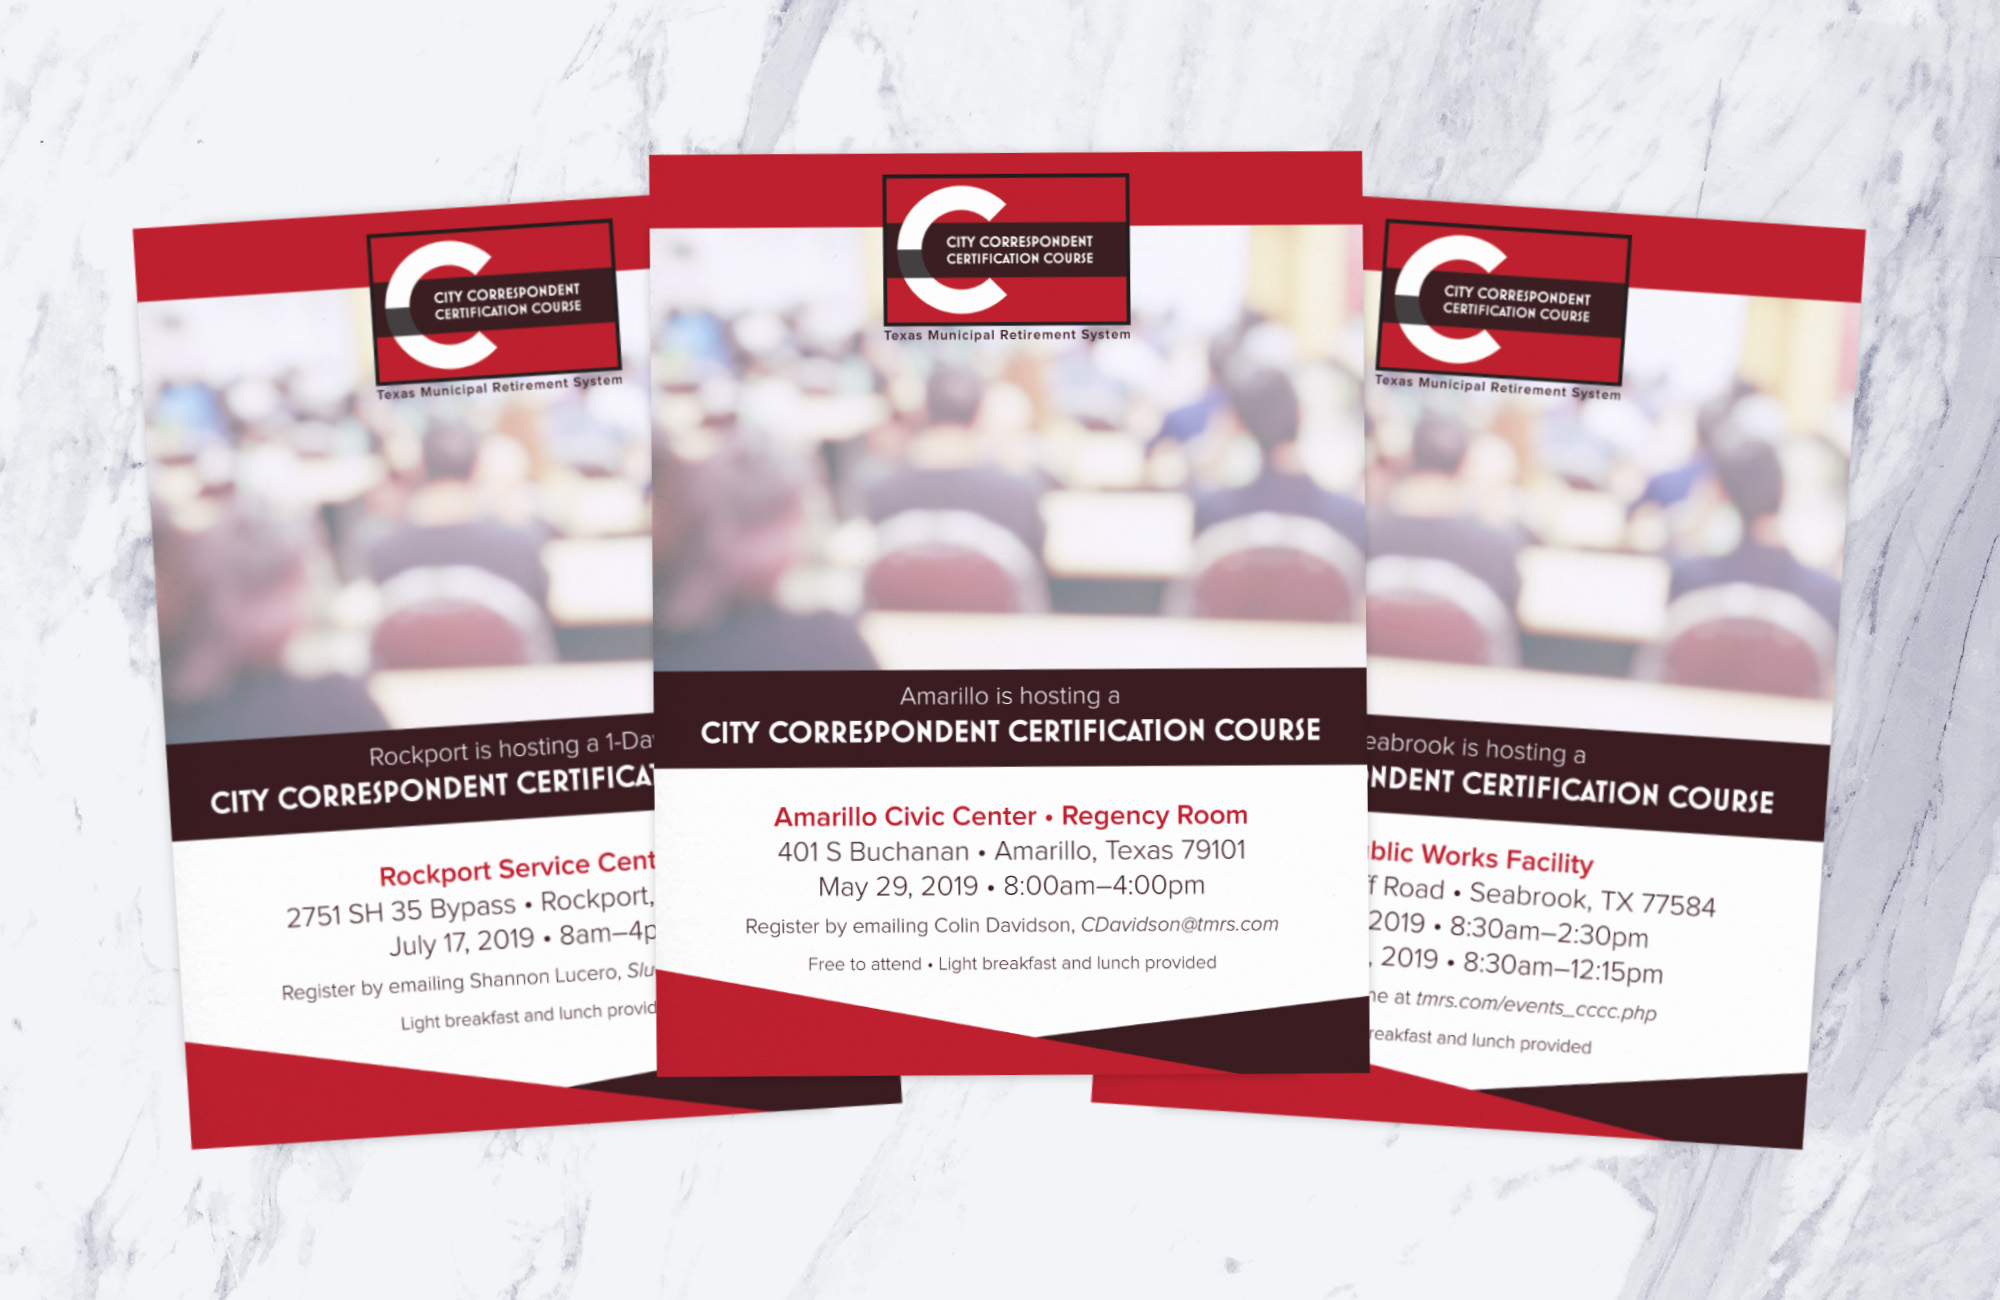 Three similar flyers sit on a light marbled background. They all contain information about City Correspondent Certification Courses being held in different TMRS cities.